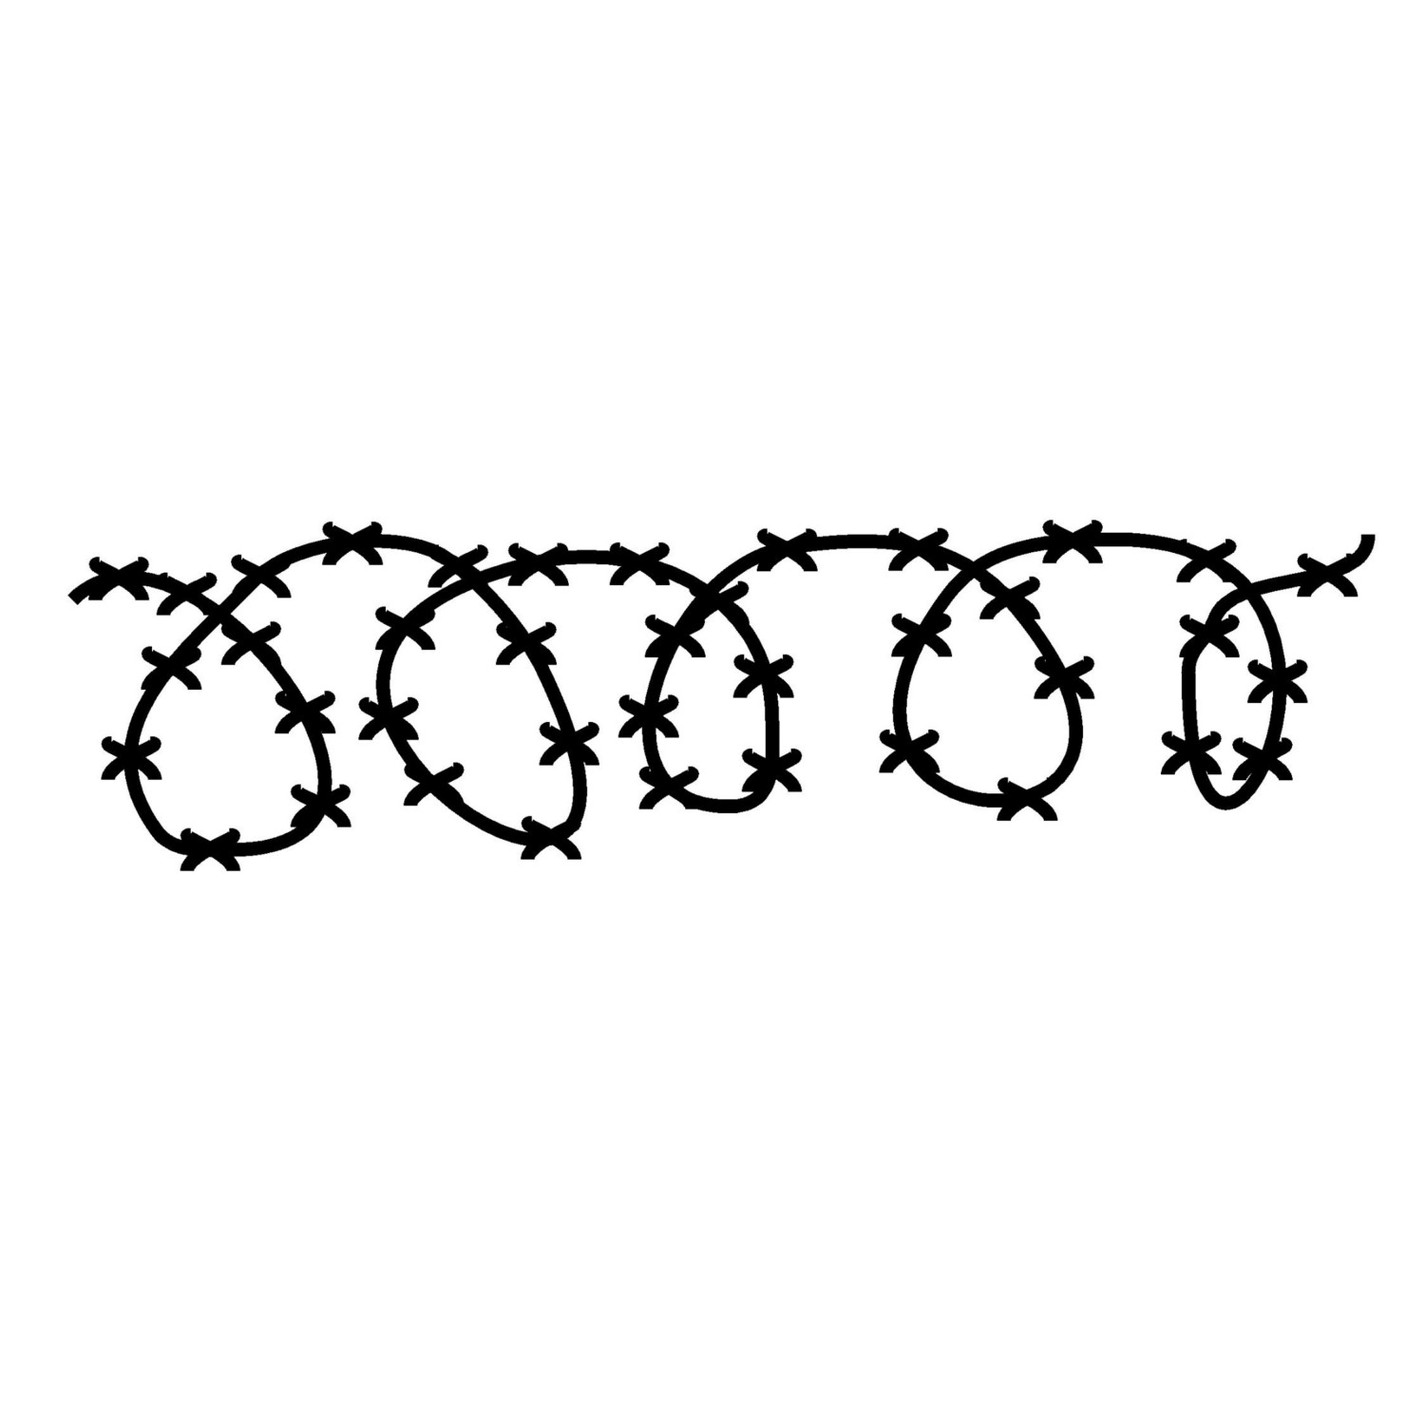 Barbed Wire Image Clipart - Free to use Clip Art Resource